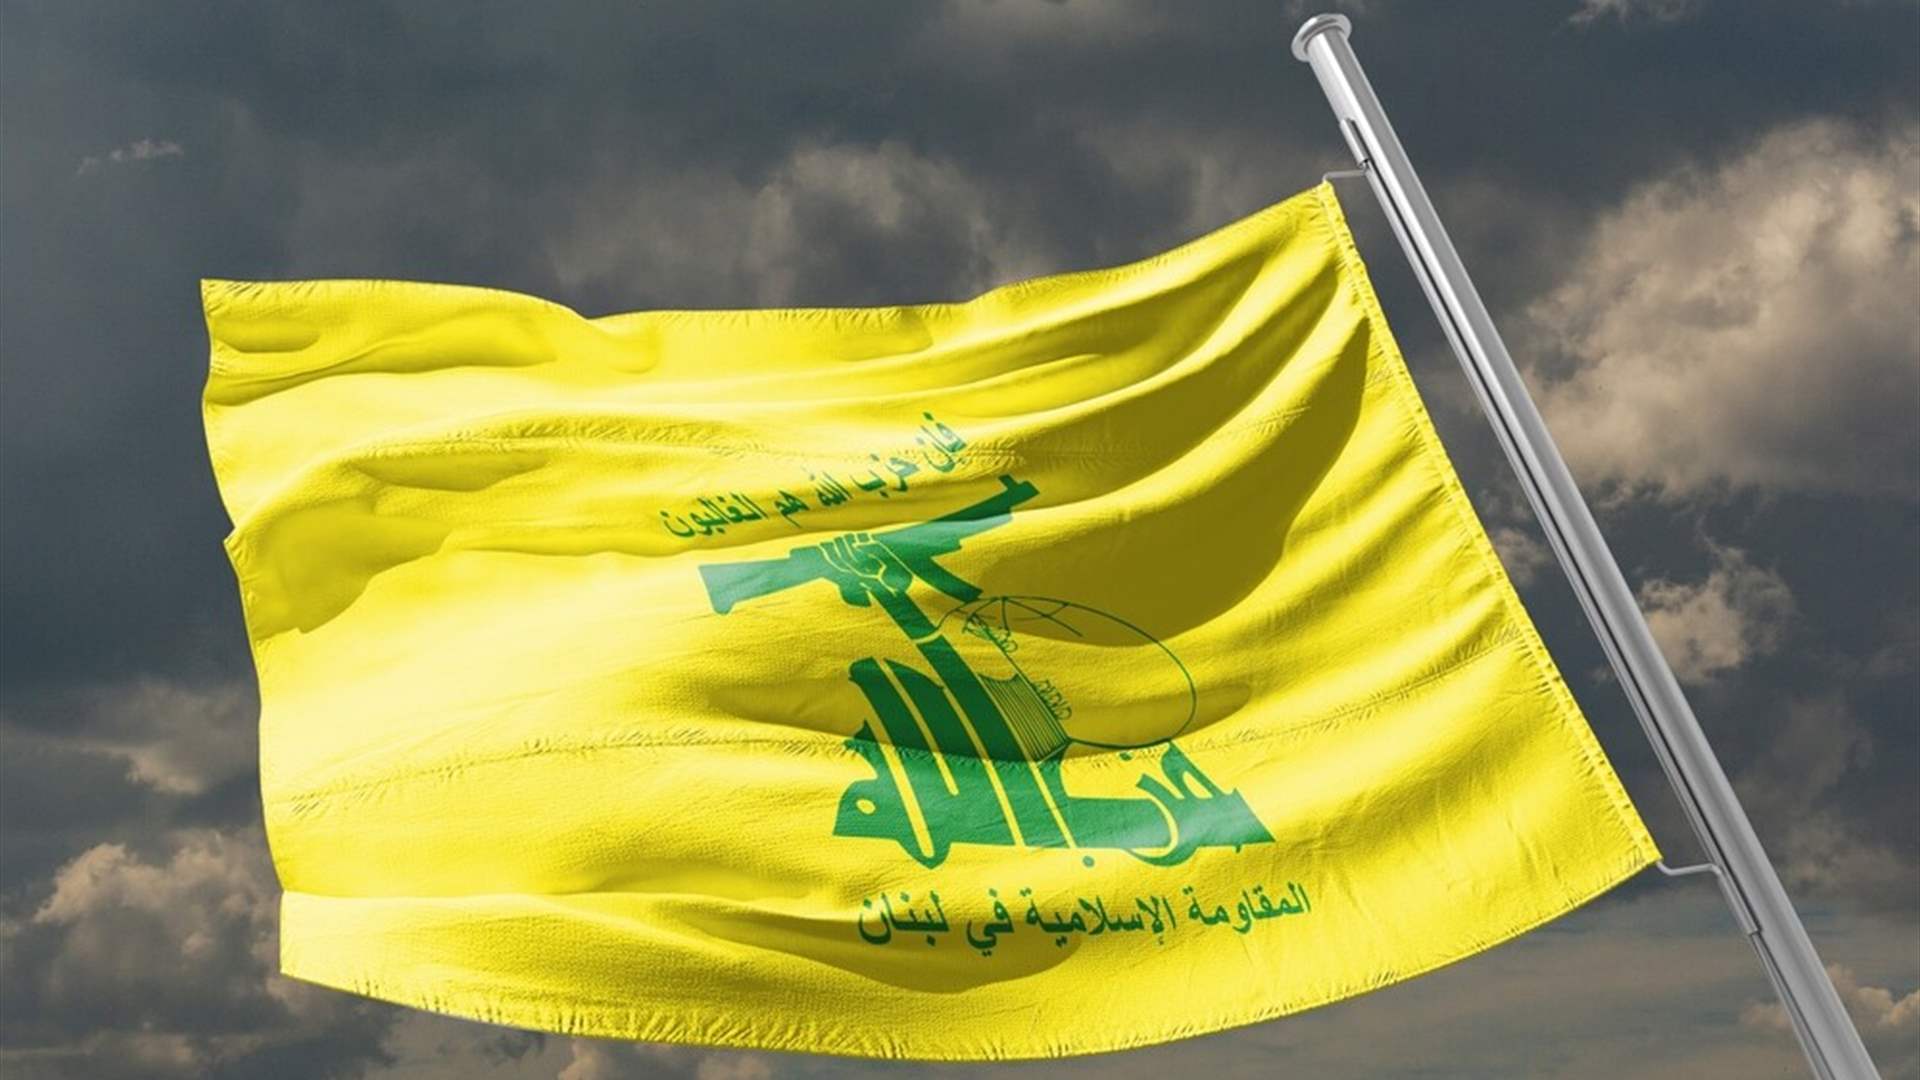 Hezbollah announces missile launch towards occupied Golan Heights